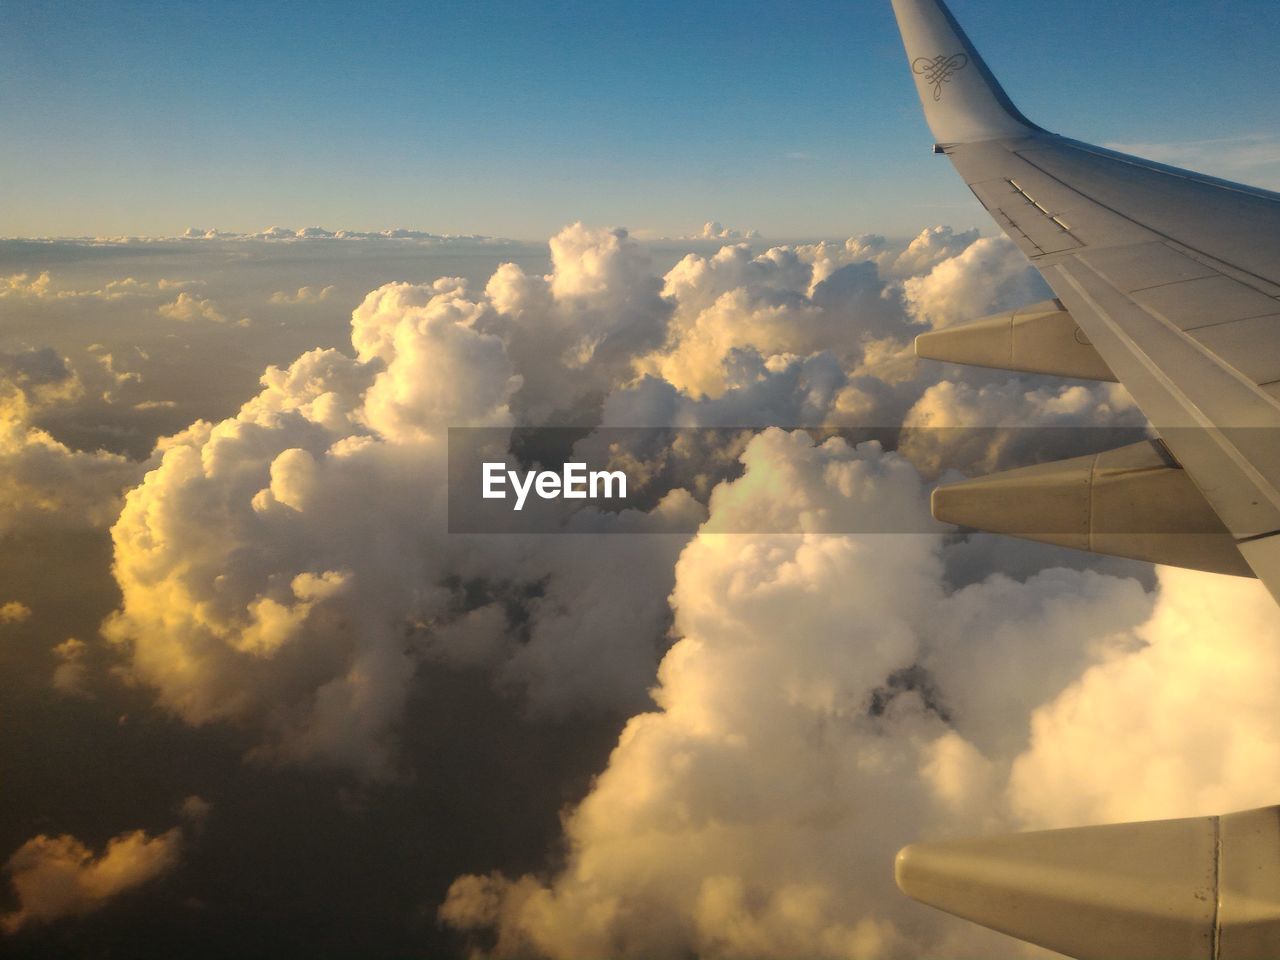 AERIAL VIEW OF CLOUDS OVER AIRPLANE